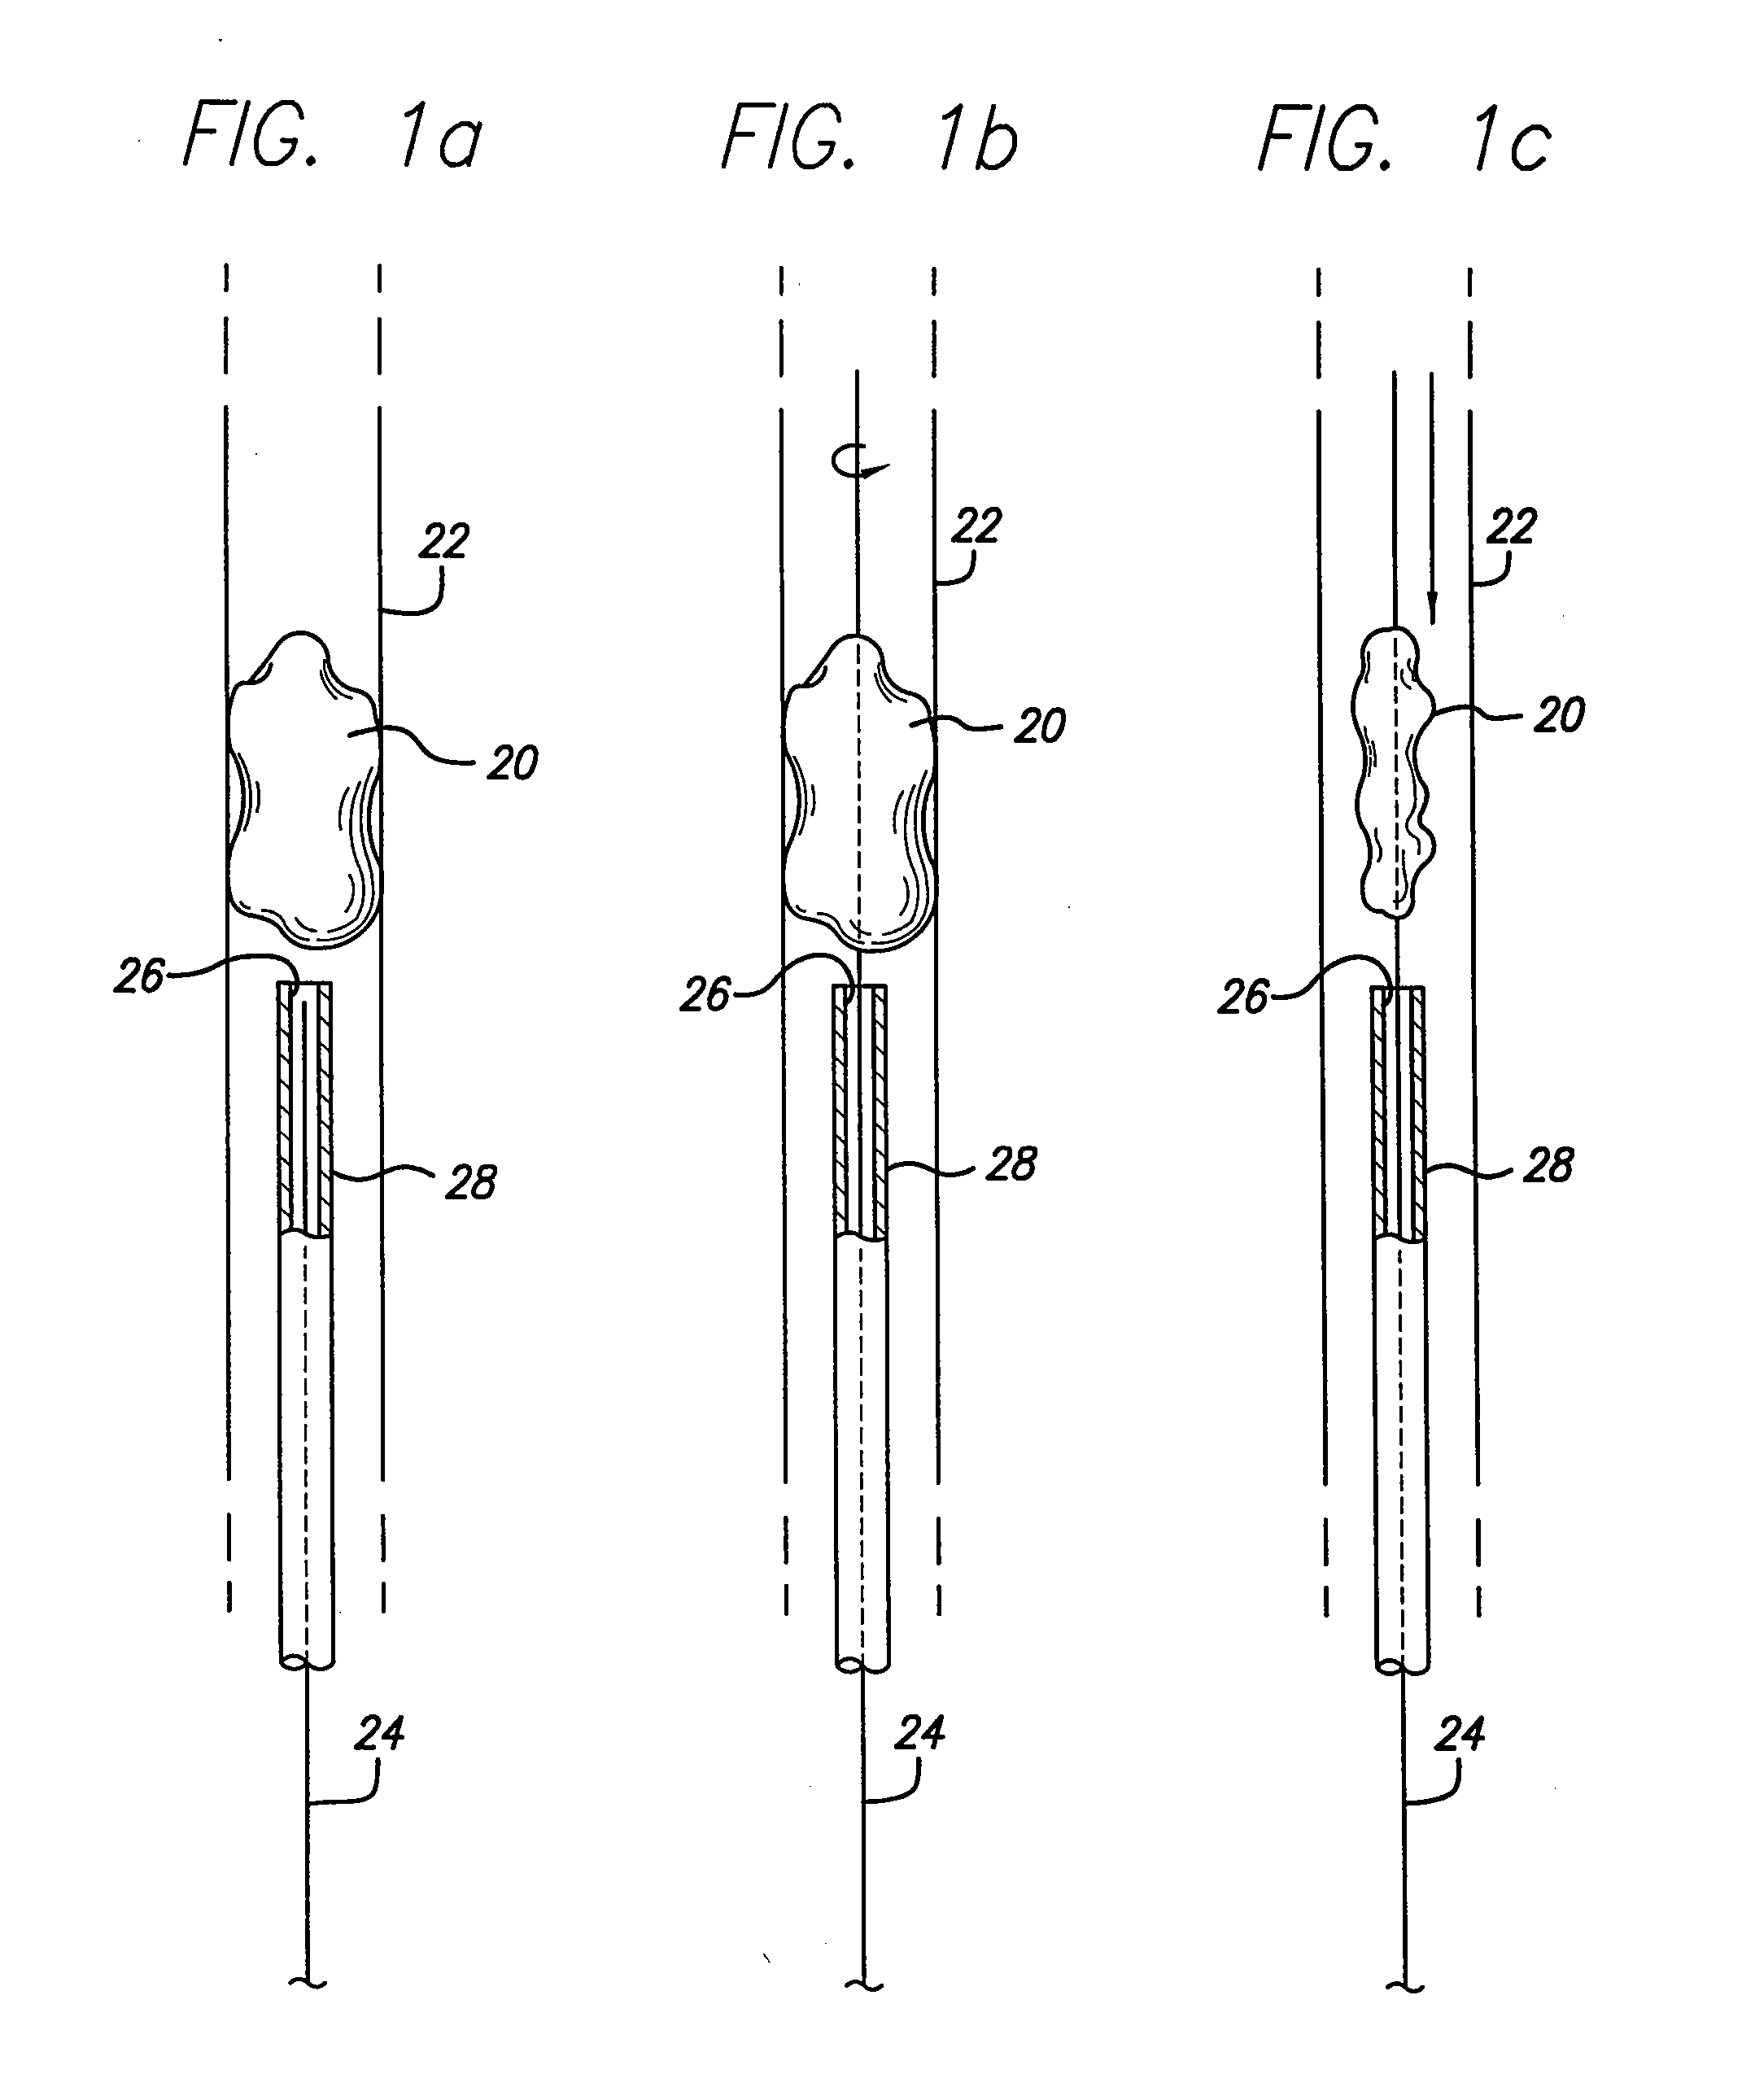 Filter/emboli extractor for use in variable sized blood vessels